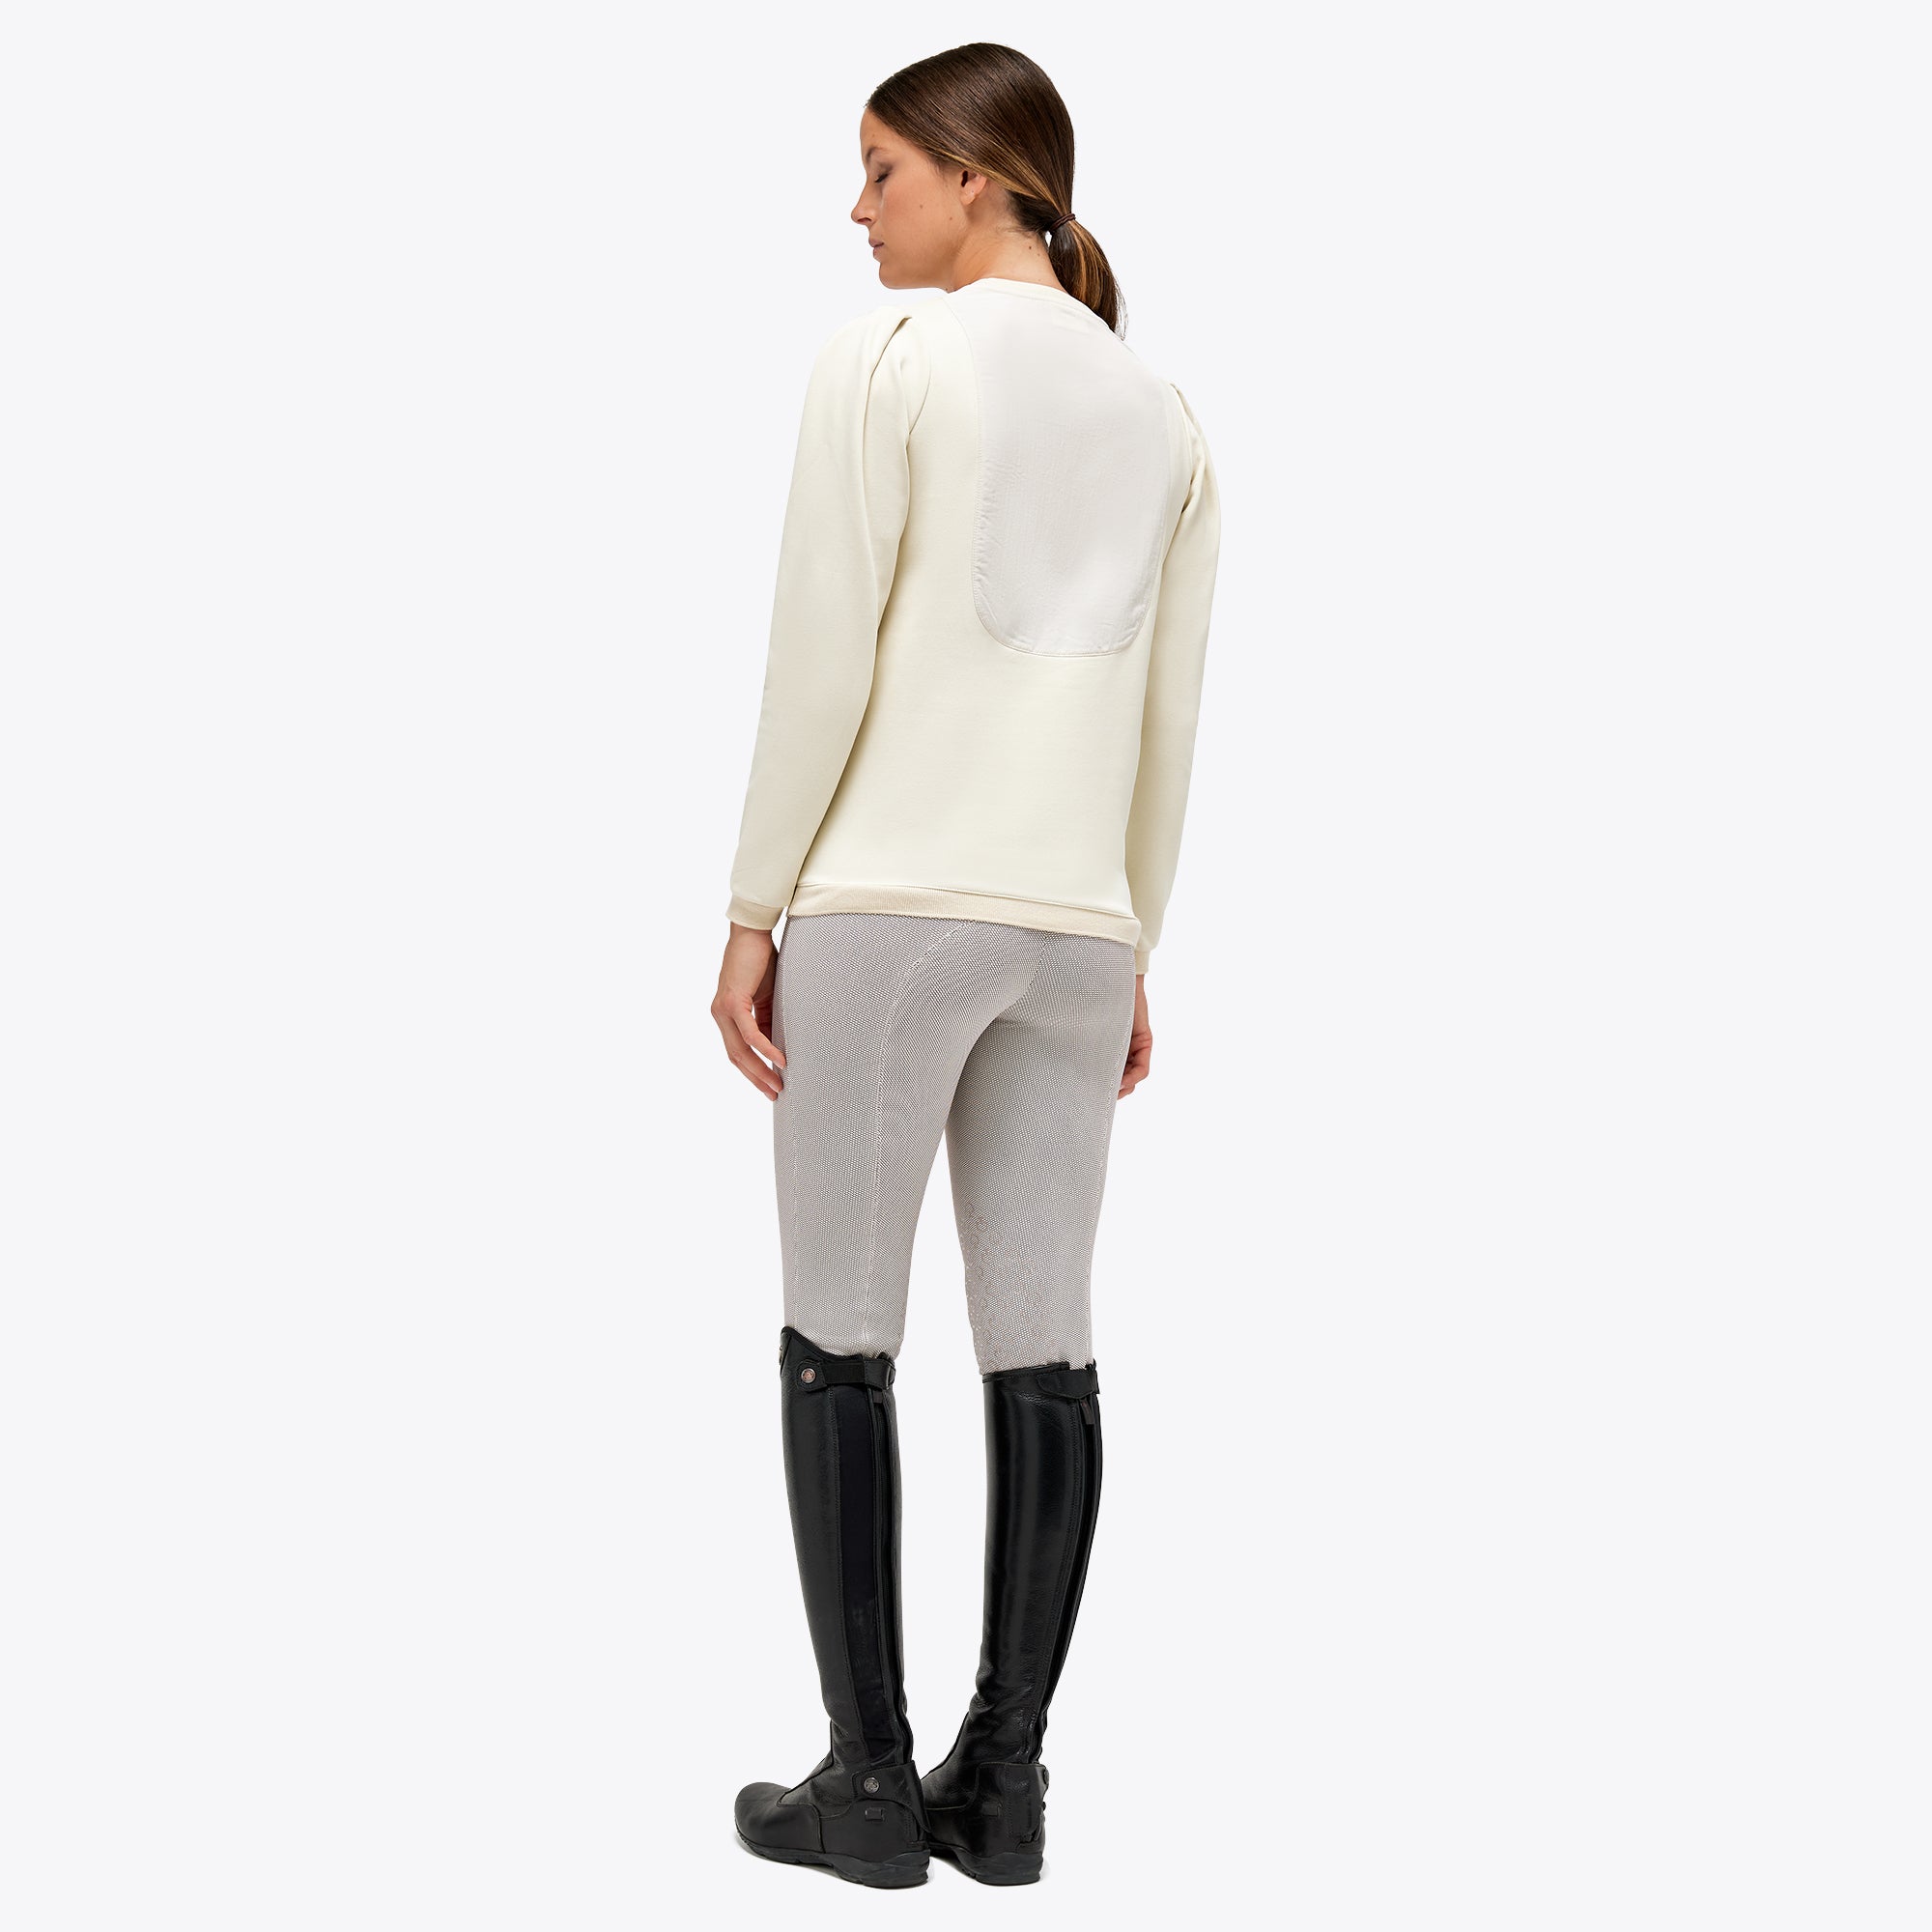 This women's sweatshirt by Cavalleria Toscana is a real eye-catcher. The nylon insert on the sides ensures higher comfort, while the emblem on the chest ensures an attractive look. The soft cotton is comfortable to wear and sometimes defies some wind and weather. Due to the off-white color, the shirt looks modern and elegant at the same time.